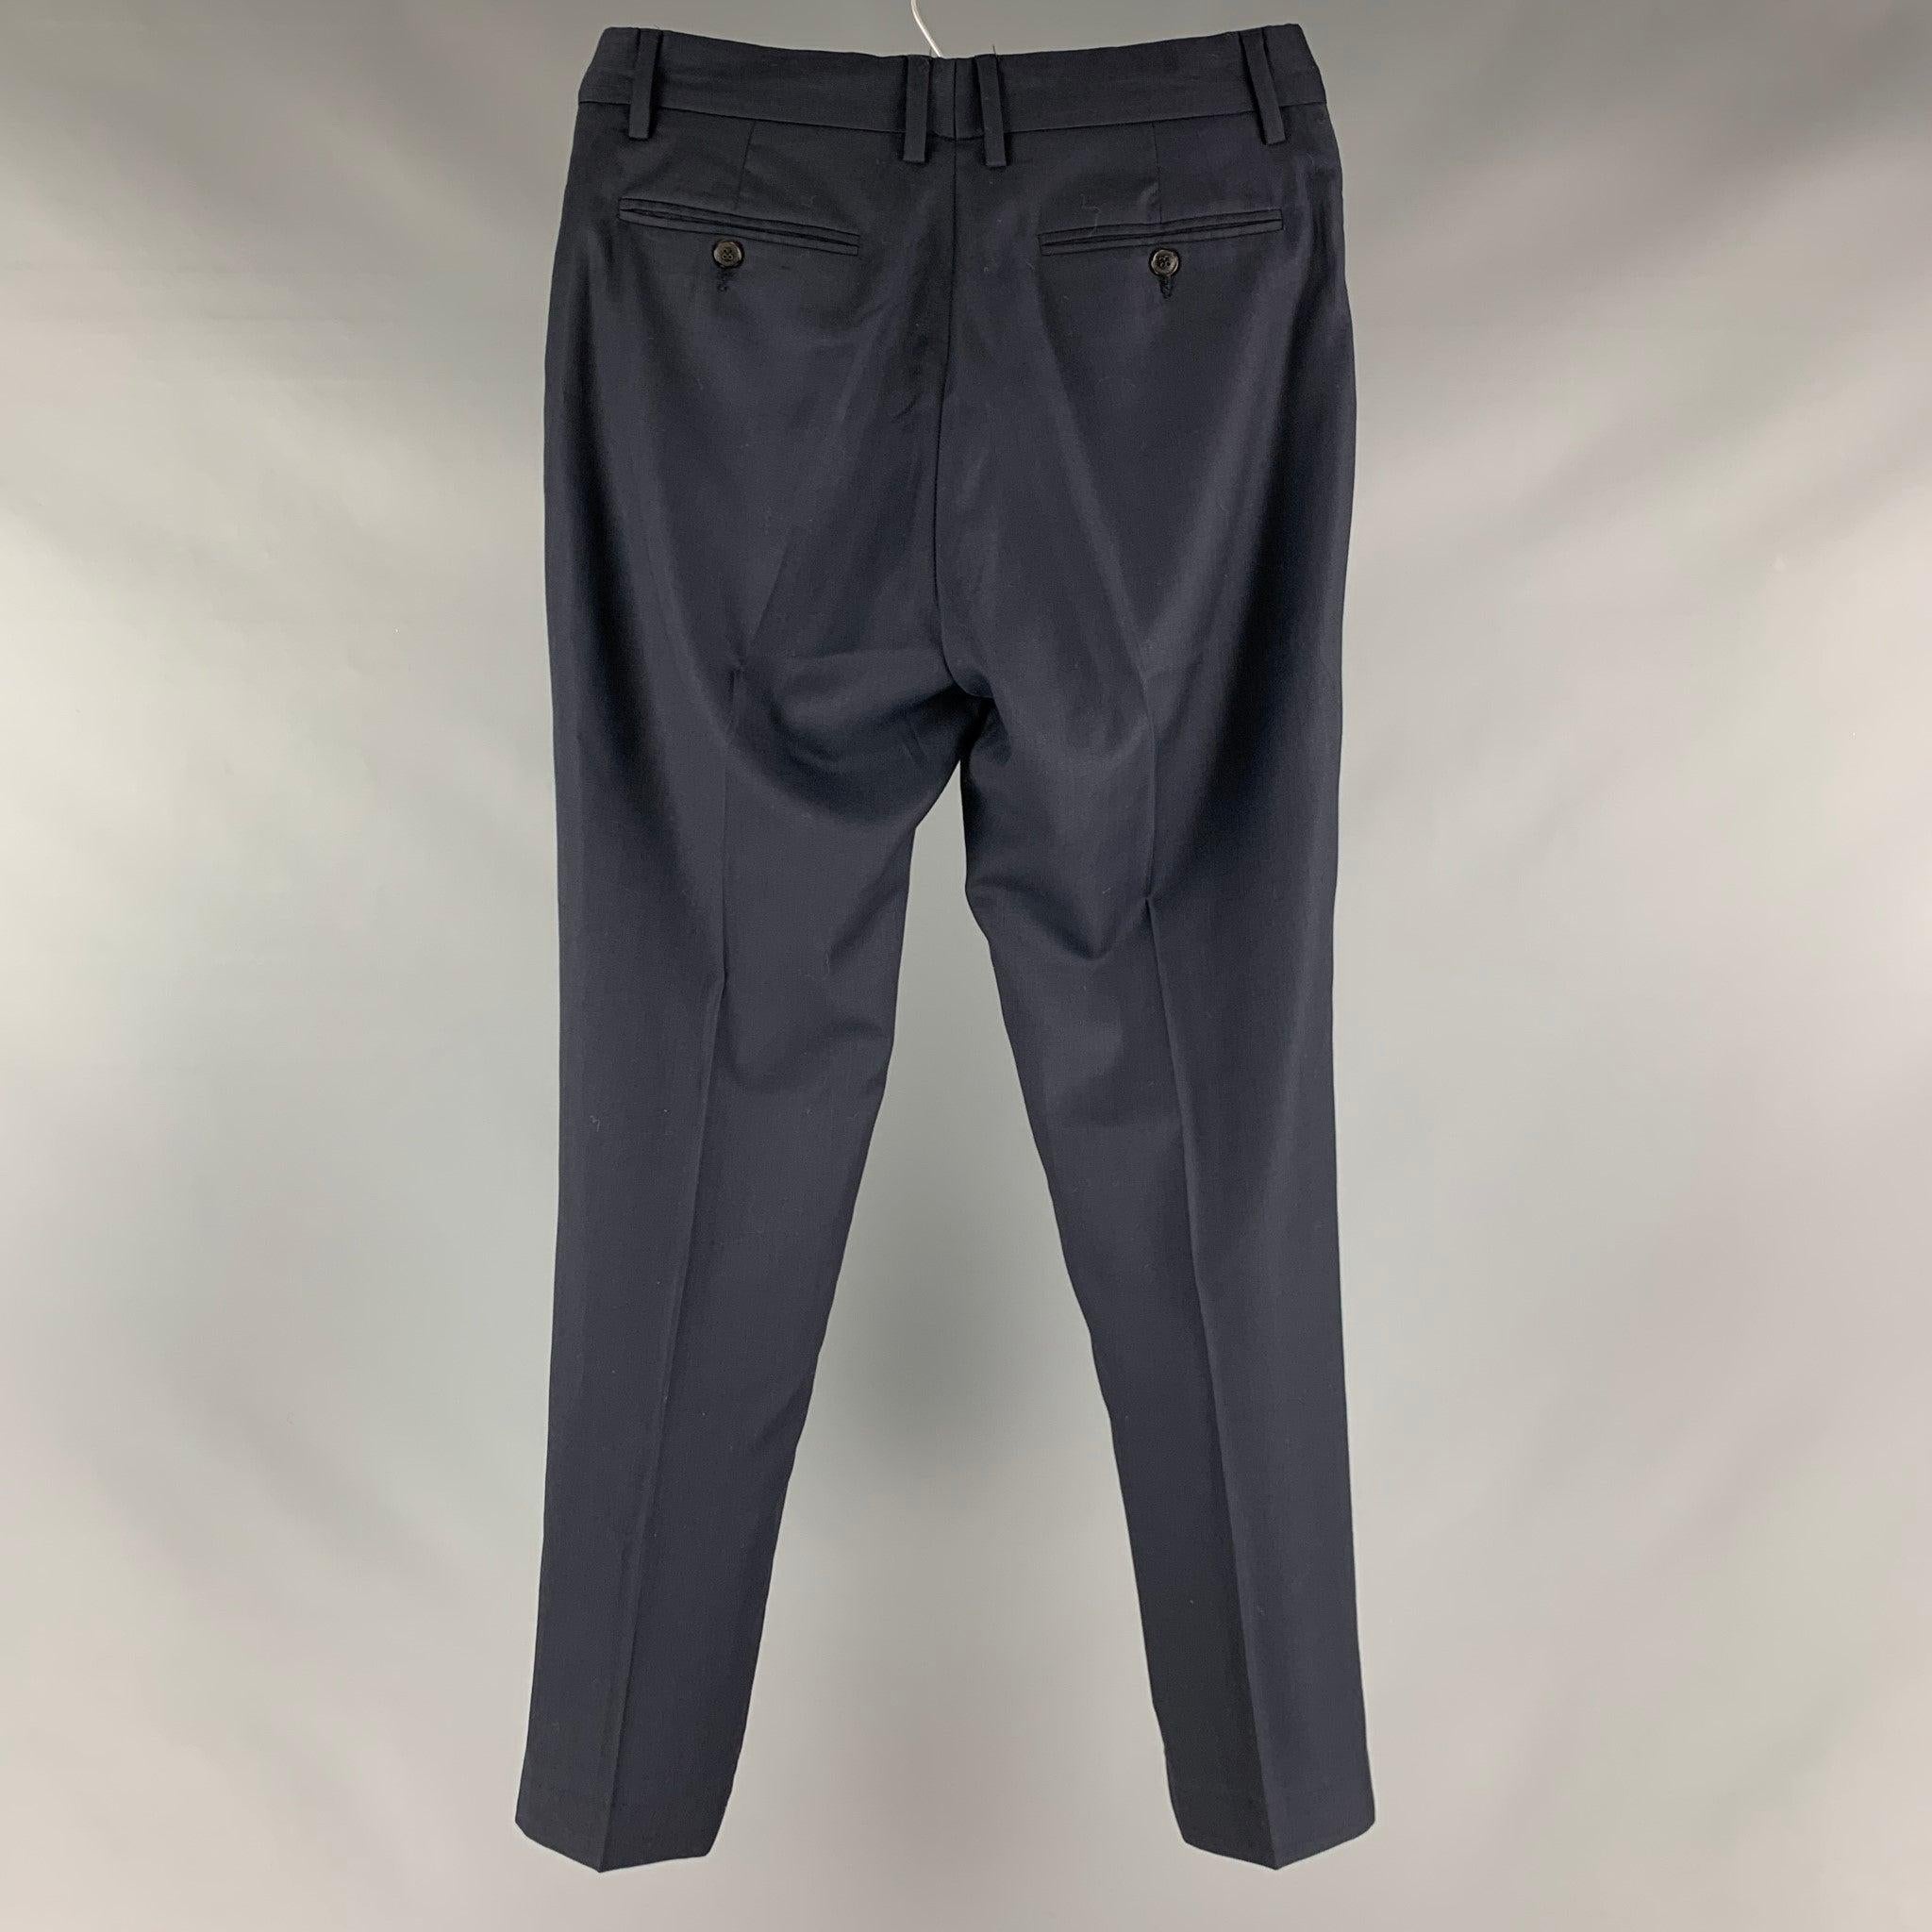 VIKTOR & ROLF dress pants comes in a navy wool woven material featuring a slit pockets, front tab, and a zip fly closure. Made in Italy.Excellent Pre-Owned Conditions. 

Marked:  48 

Measurements: 
 Waist: 30 inches Rise: 9 inches Inseam: 31 inches